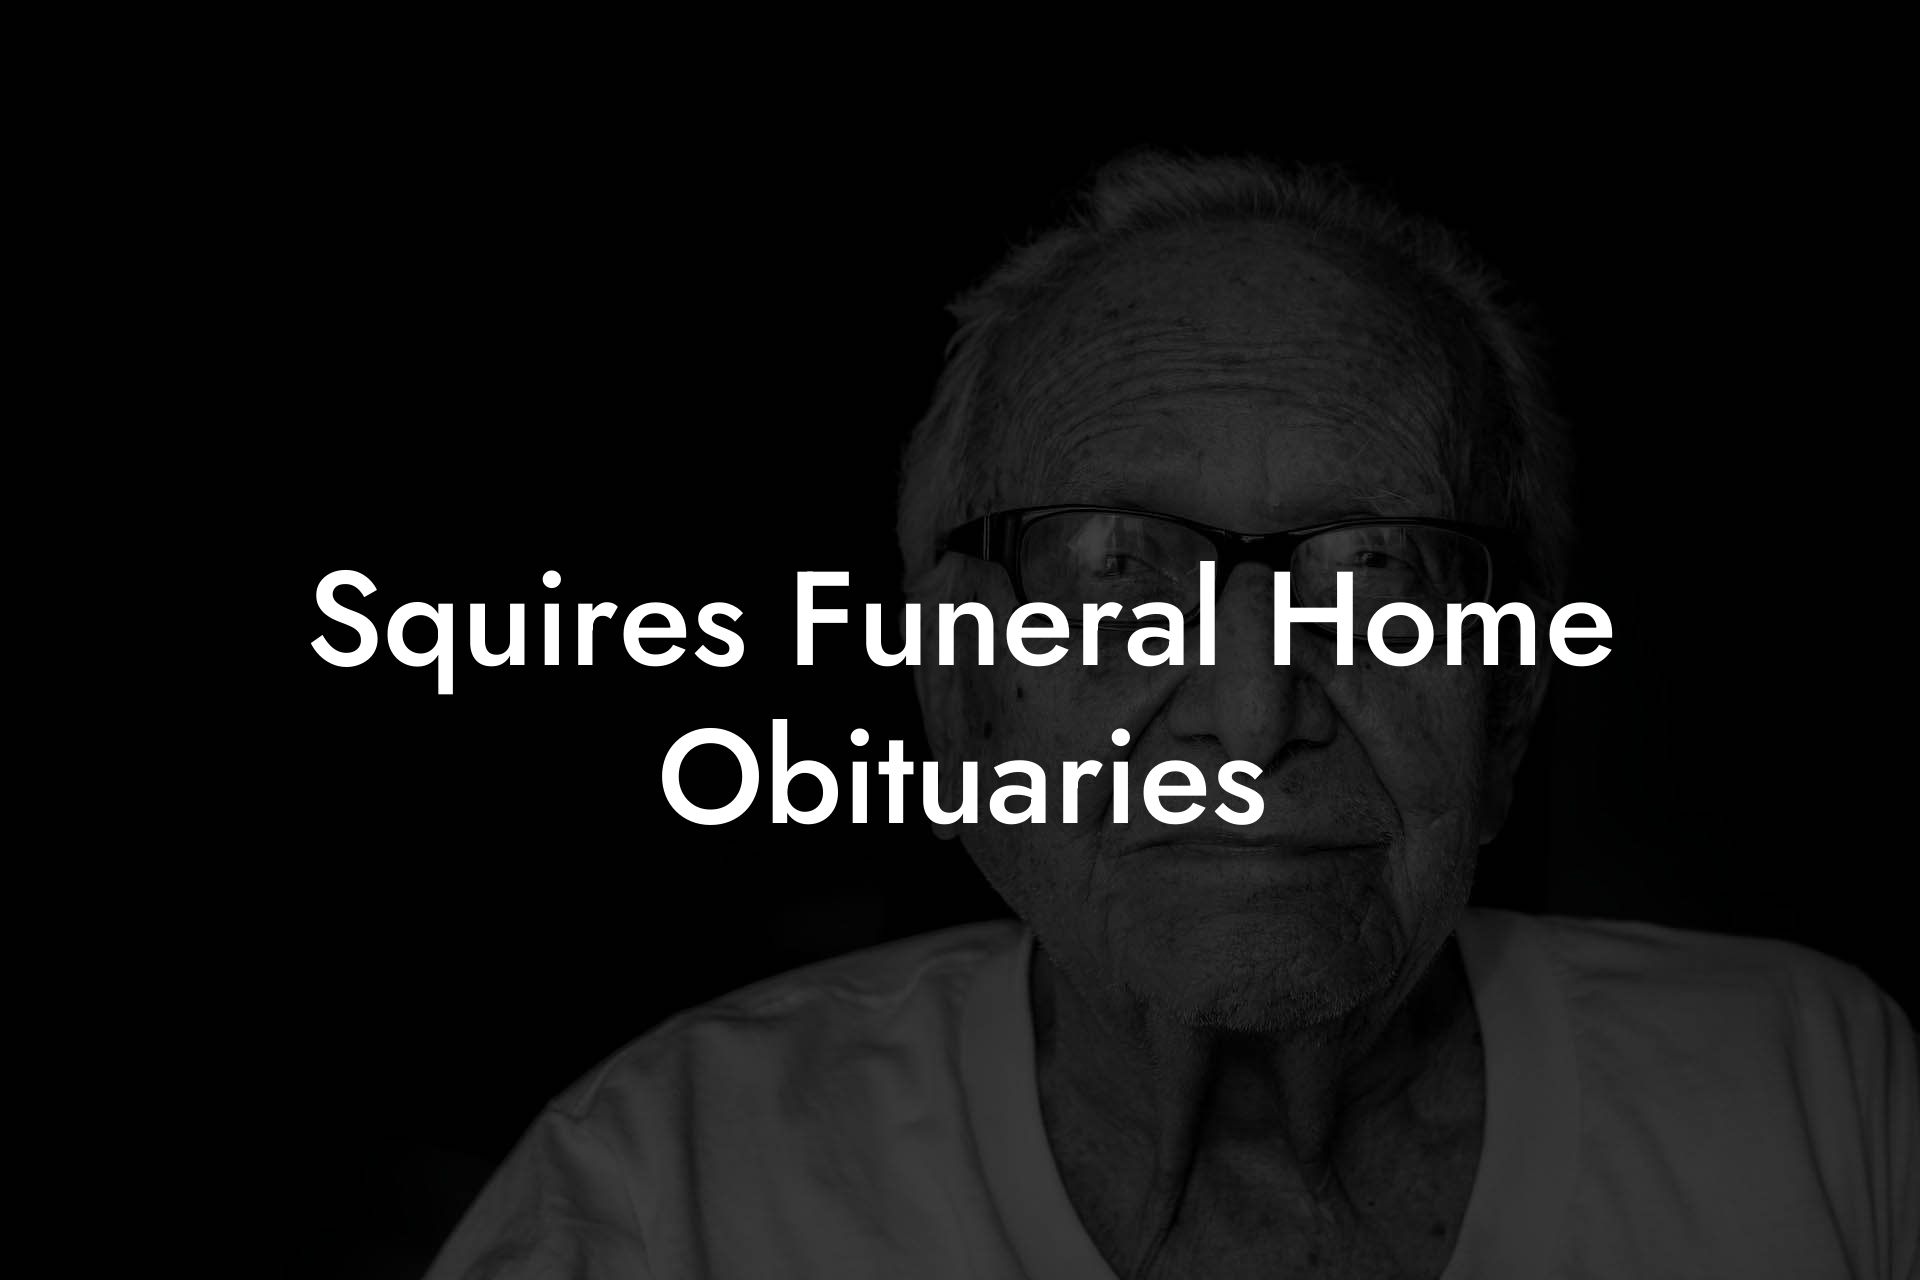 Squires Funeral Home Obituaries